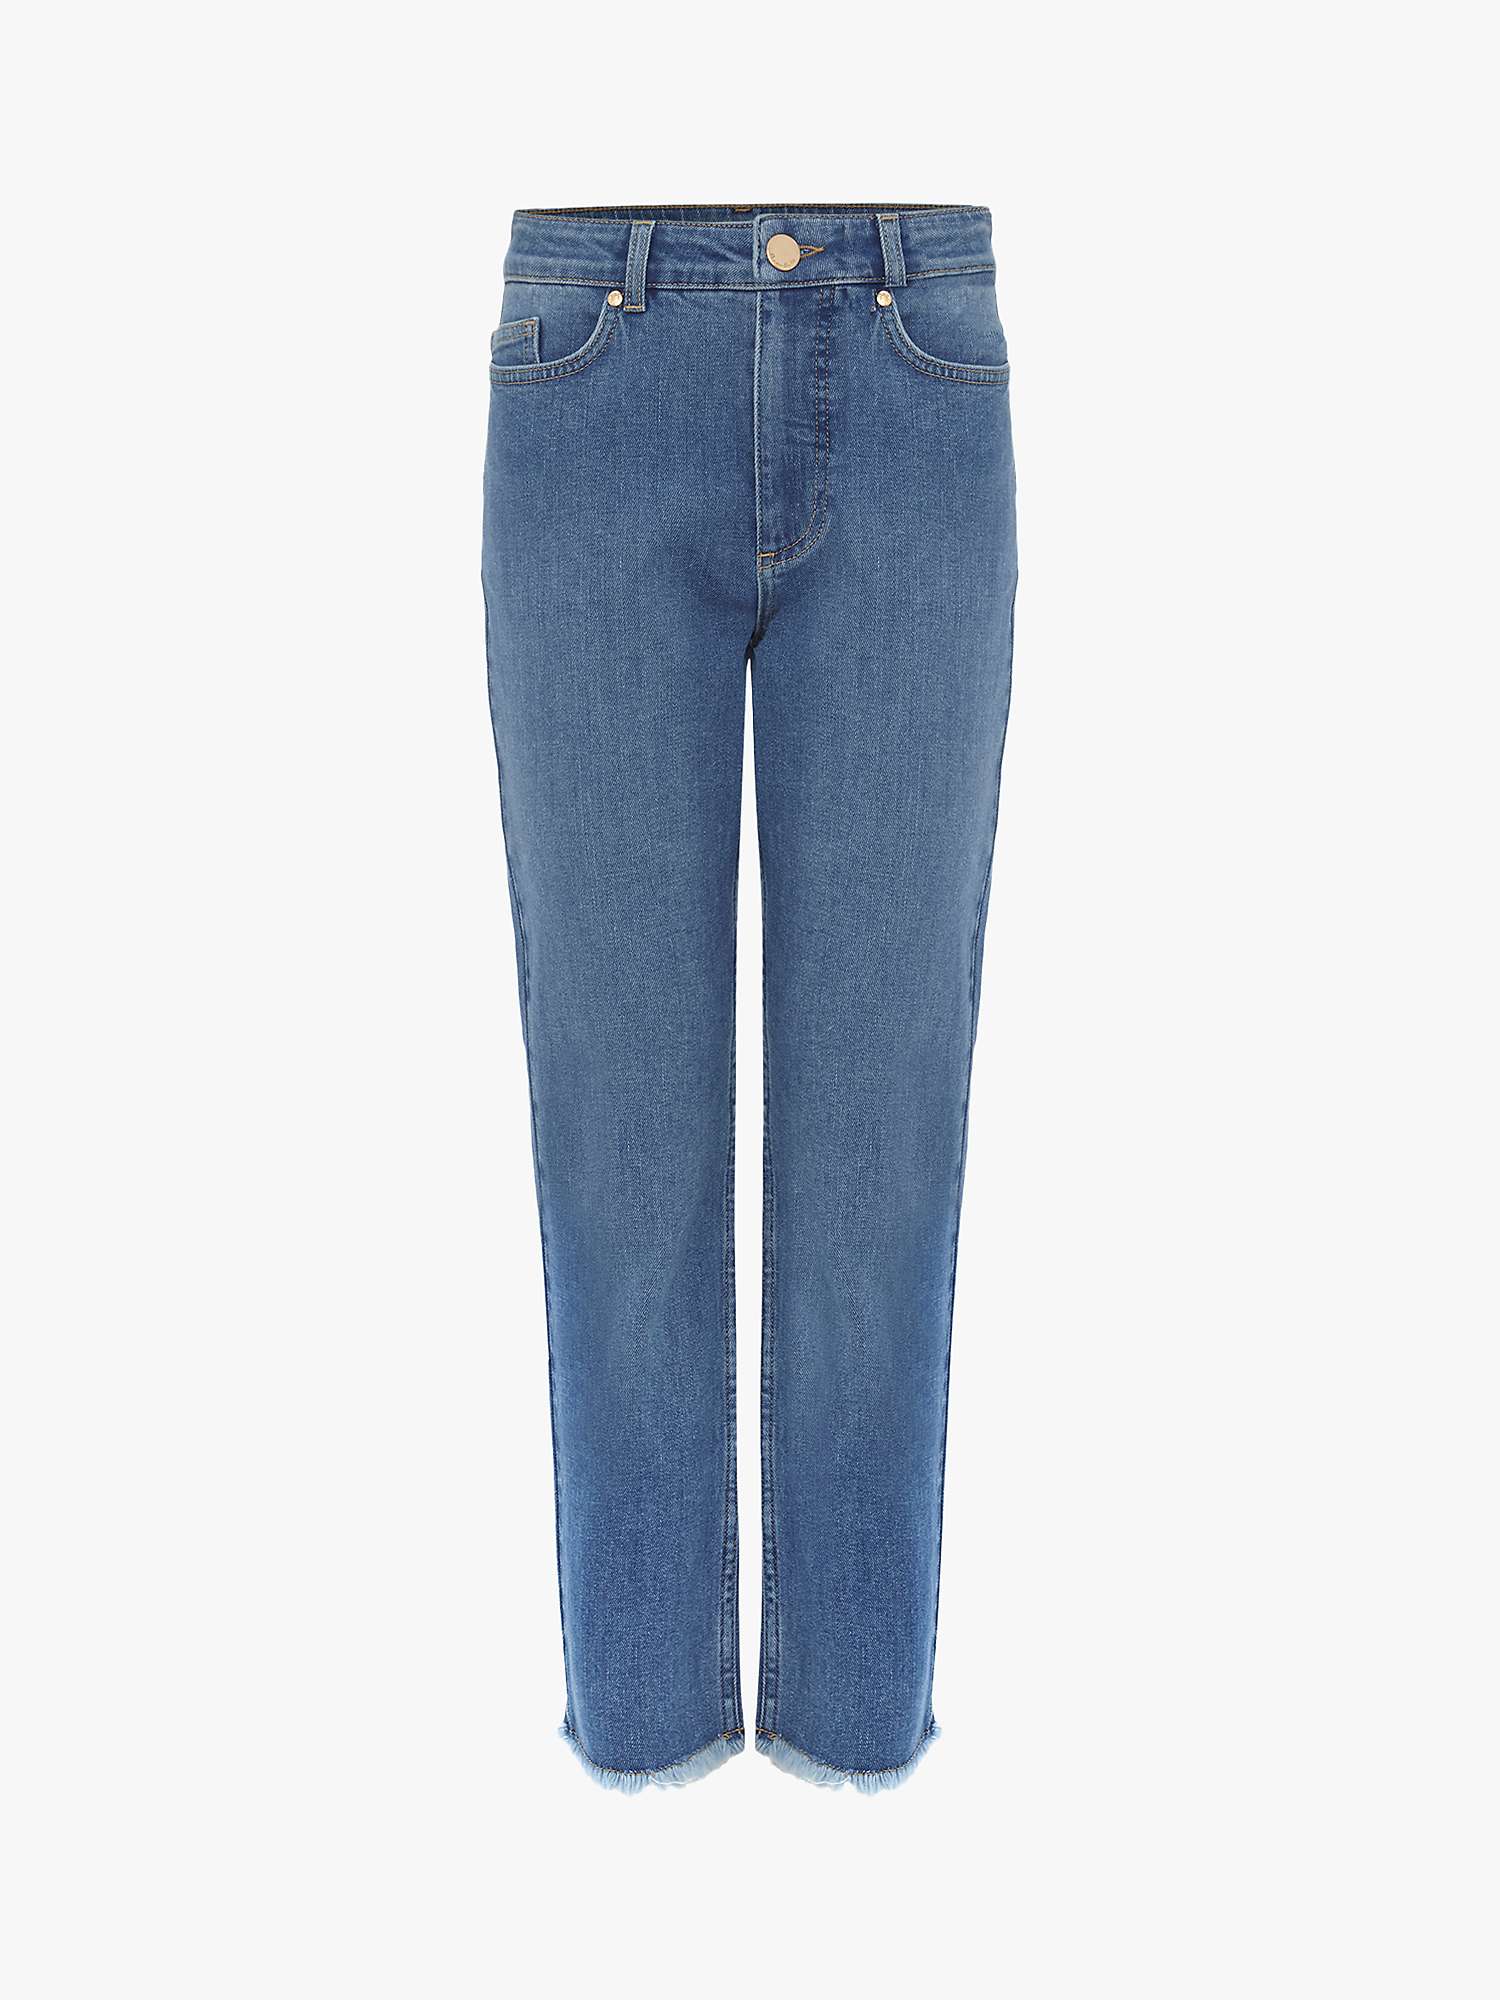 Buy Phase Eight Petra Raw Hem Cropped Jeans, Blue Online at johnlewis.com